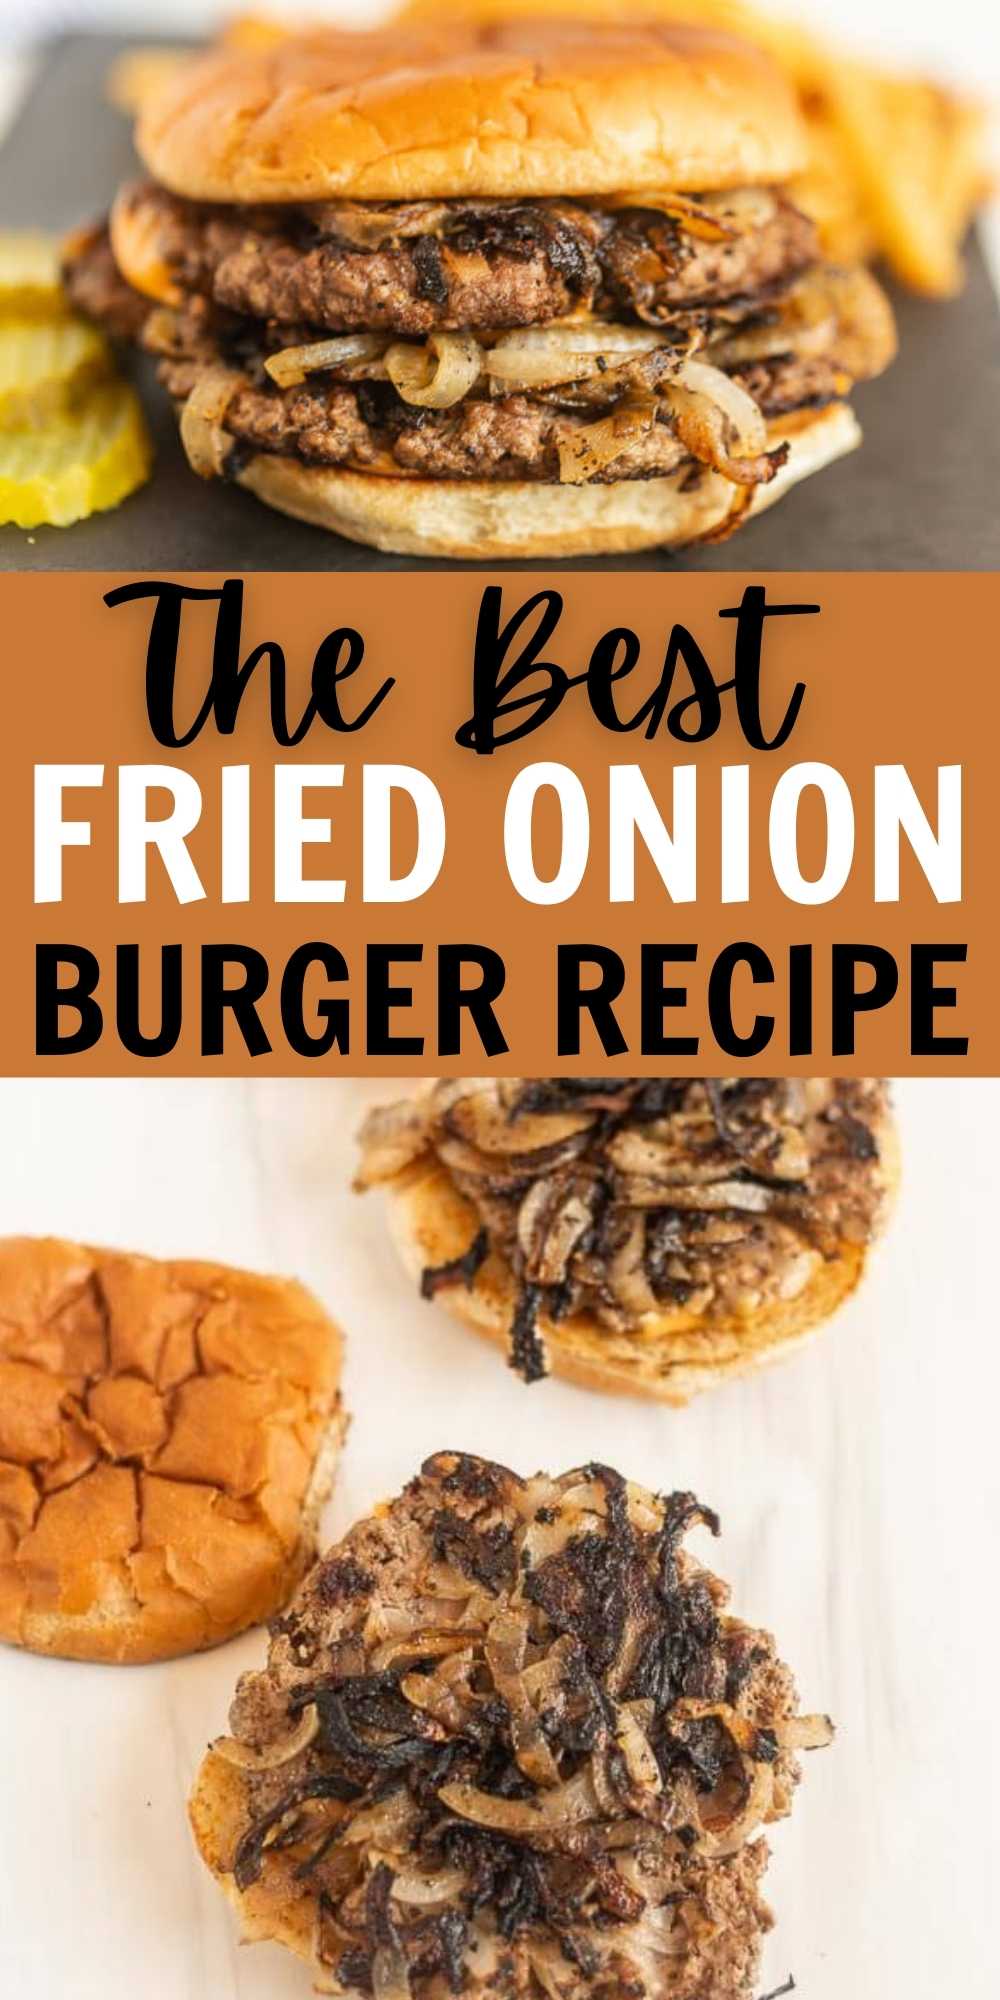 Fried onion burgers will be the hit of the cookout. These smashed burgers are cooked to perfection and topped with grilled onions. These Southern Fried Onion Burgers are easy to make at home with this recipe! #eatingonadime #burgerrecipes #grillingrecipes #blackstonerecipes 